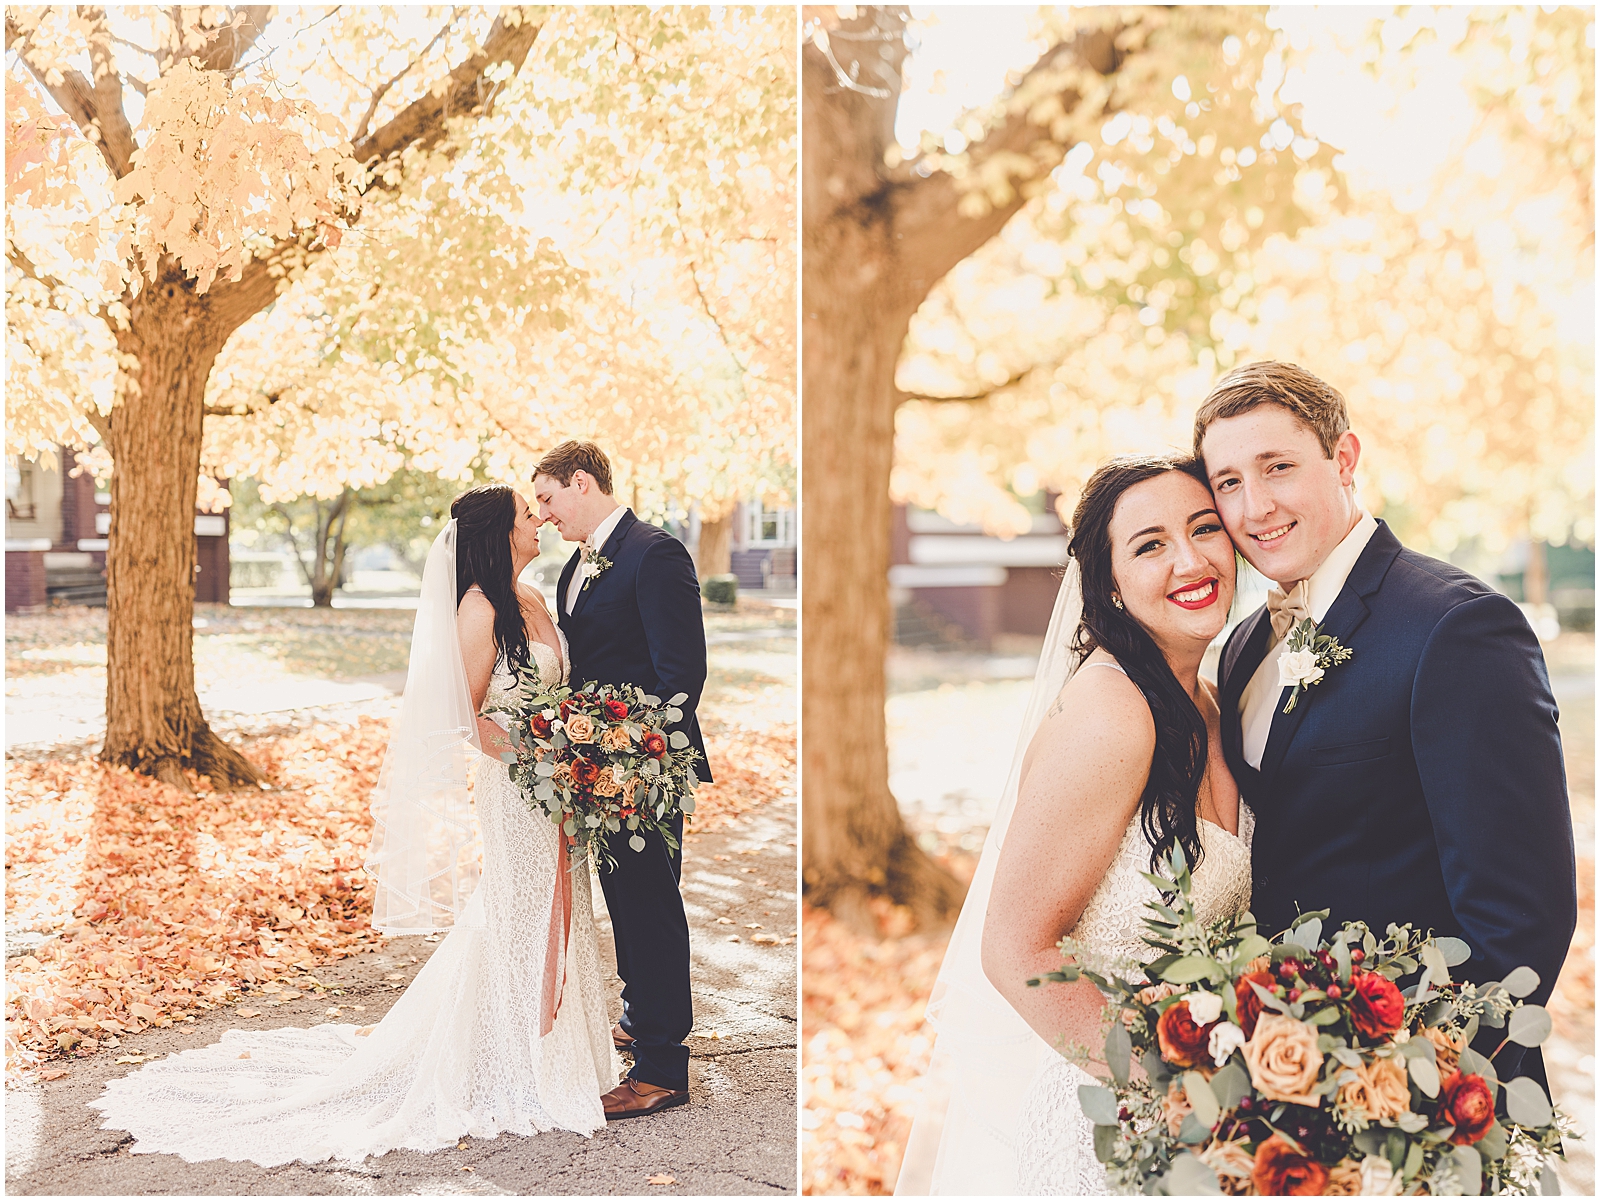 Kylie and Noah's fall wedding at Town & Country Events in Milford, Illinois with Chicagoland wedding photographer Kara Evans Photographer.